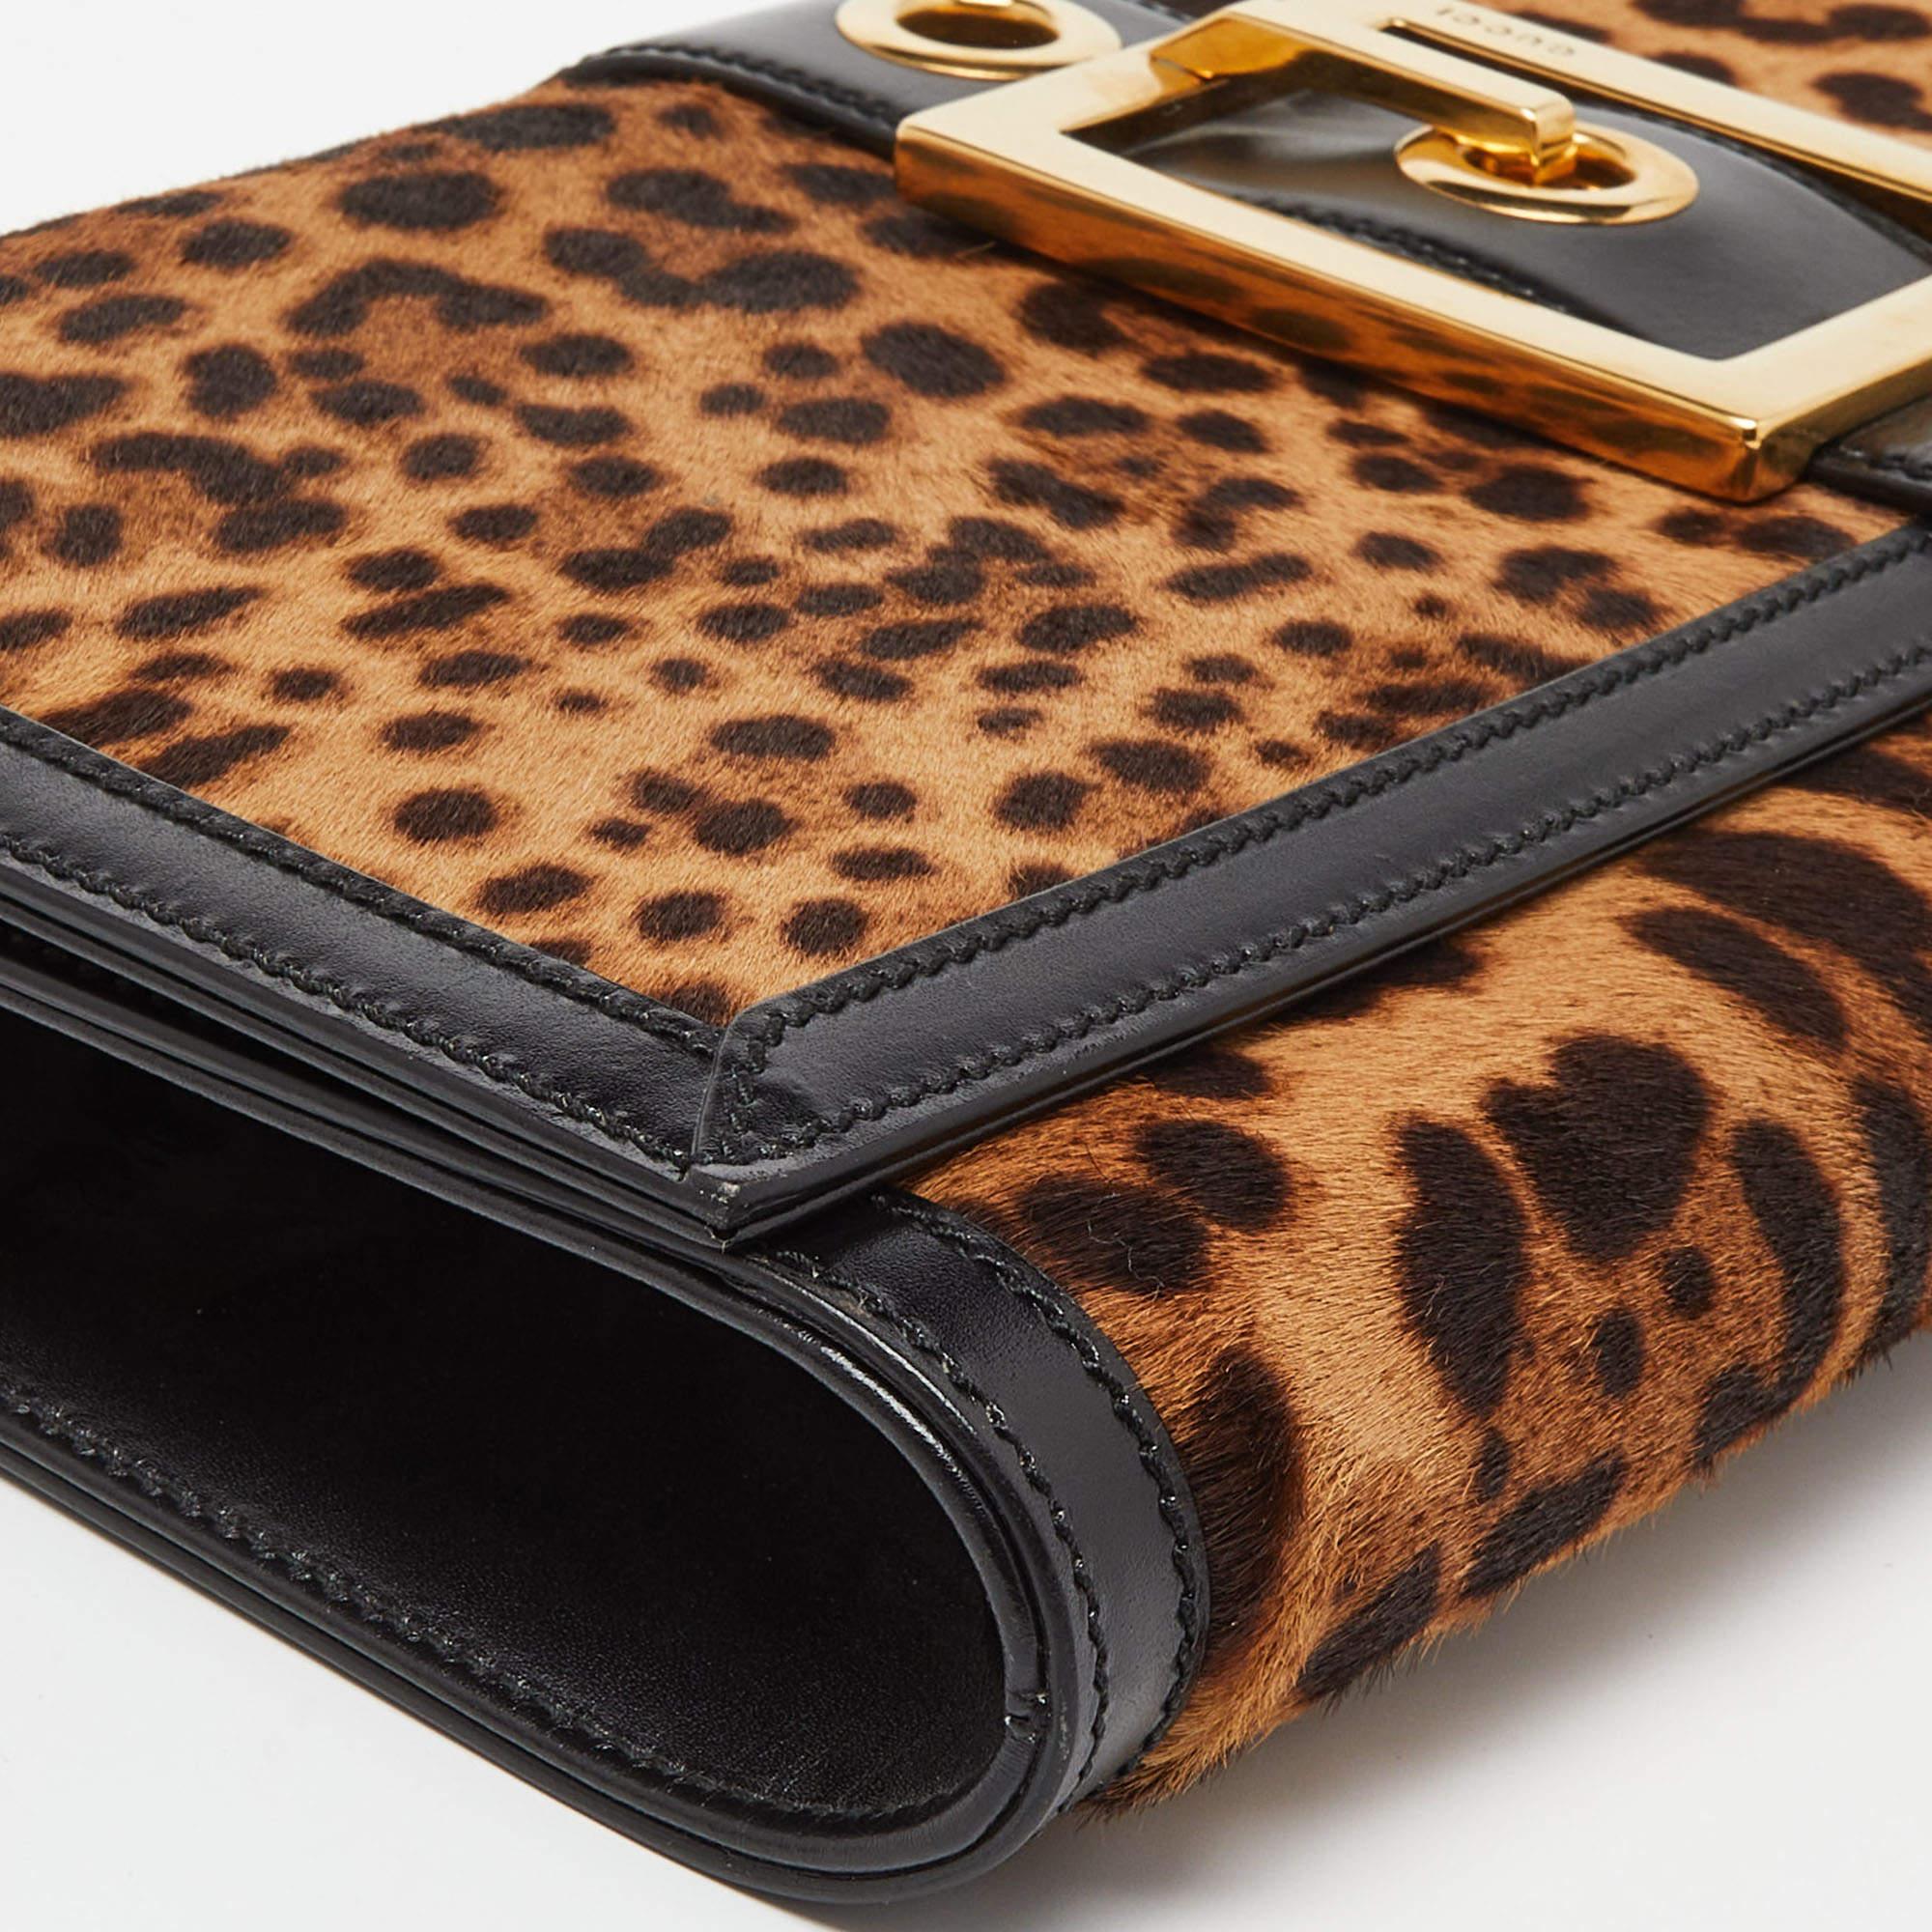 Gucci Brown/Black Leopard Print Calfhair and Leather Lady Buckle Clutch For Sale 3